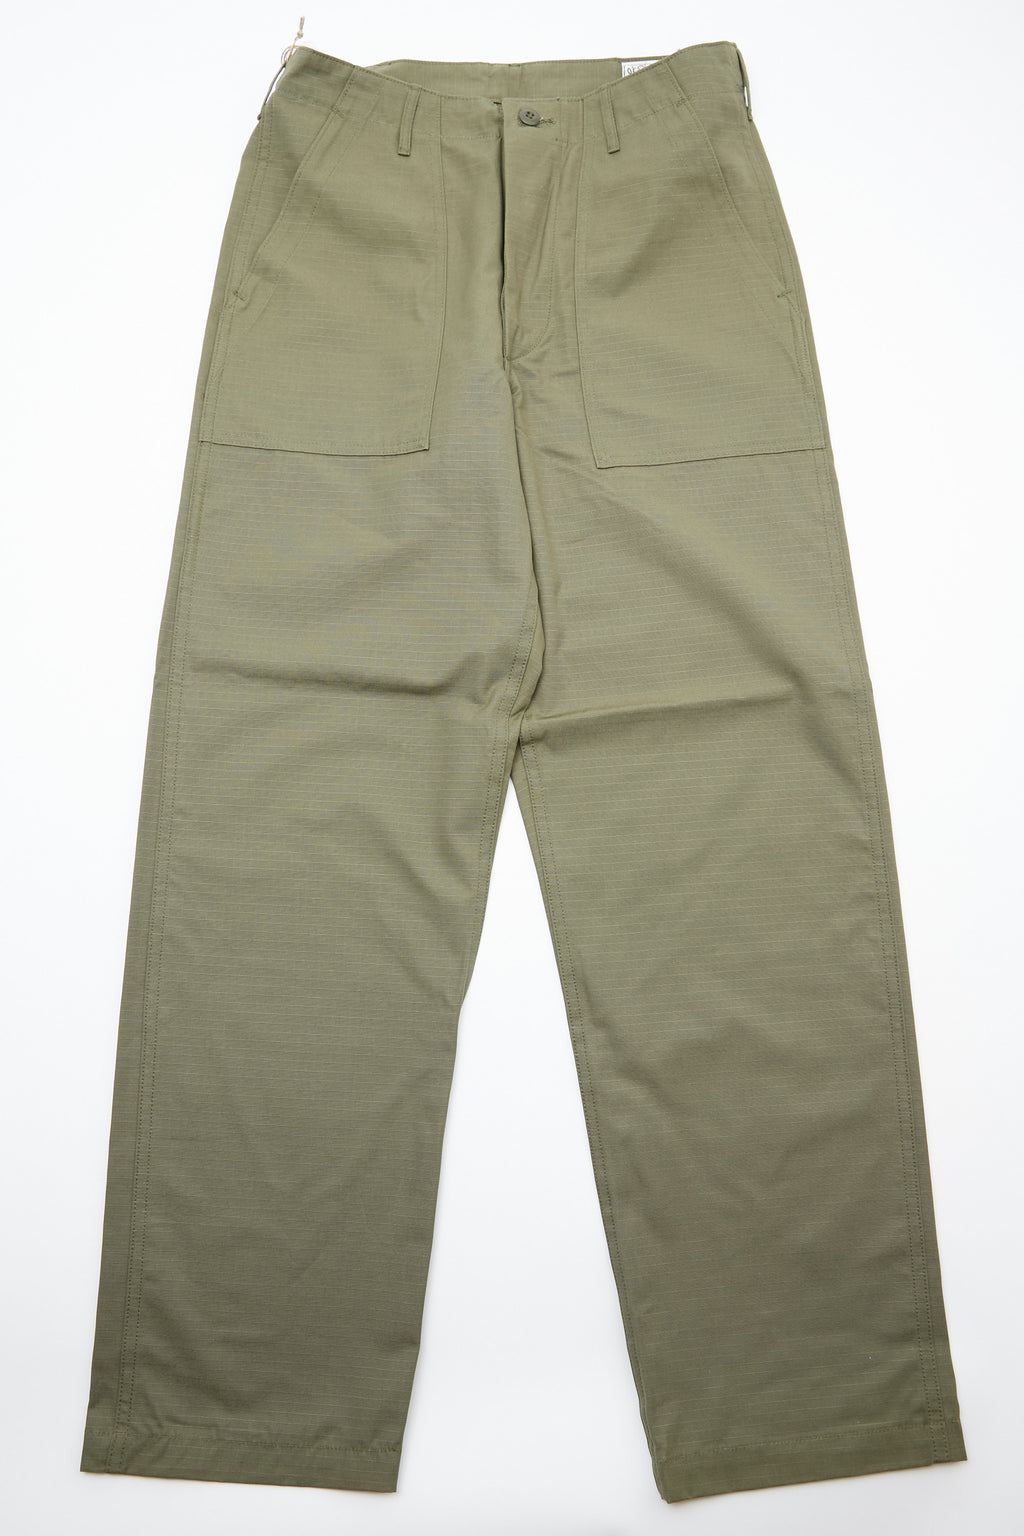 OrSlow US Army Fatigue Rip-Stop Pants (Regular Fit) - Army Green